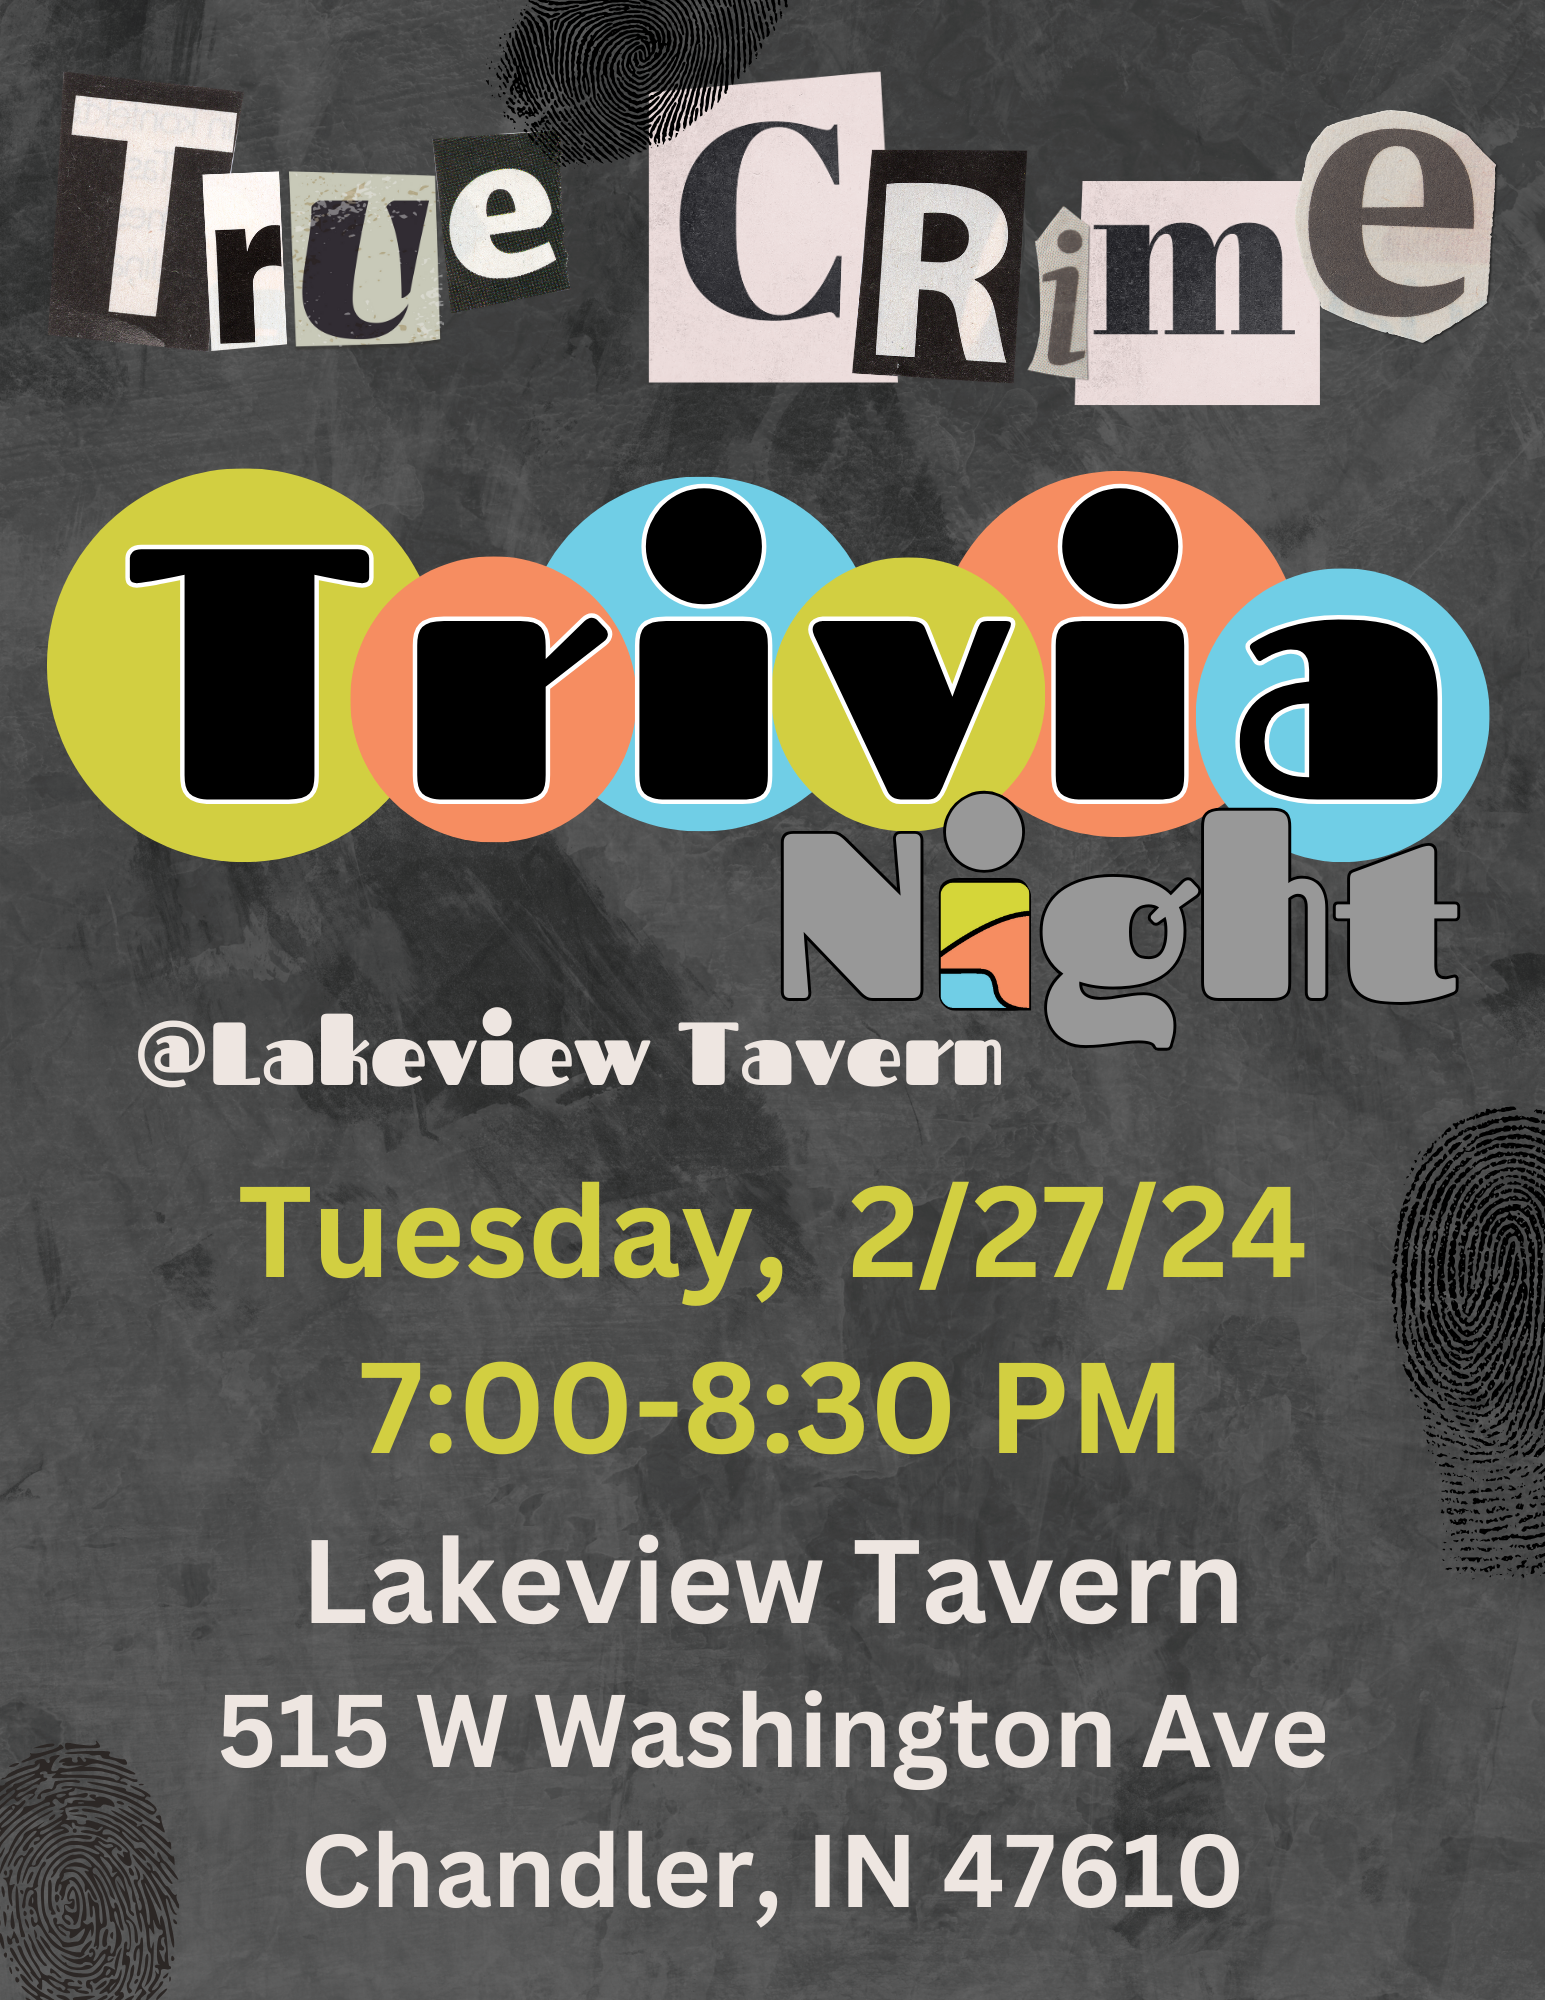 Chandler Adult Trivia @ Lakeview Tavern | Chandler | Indiana | United States